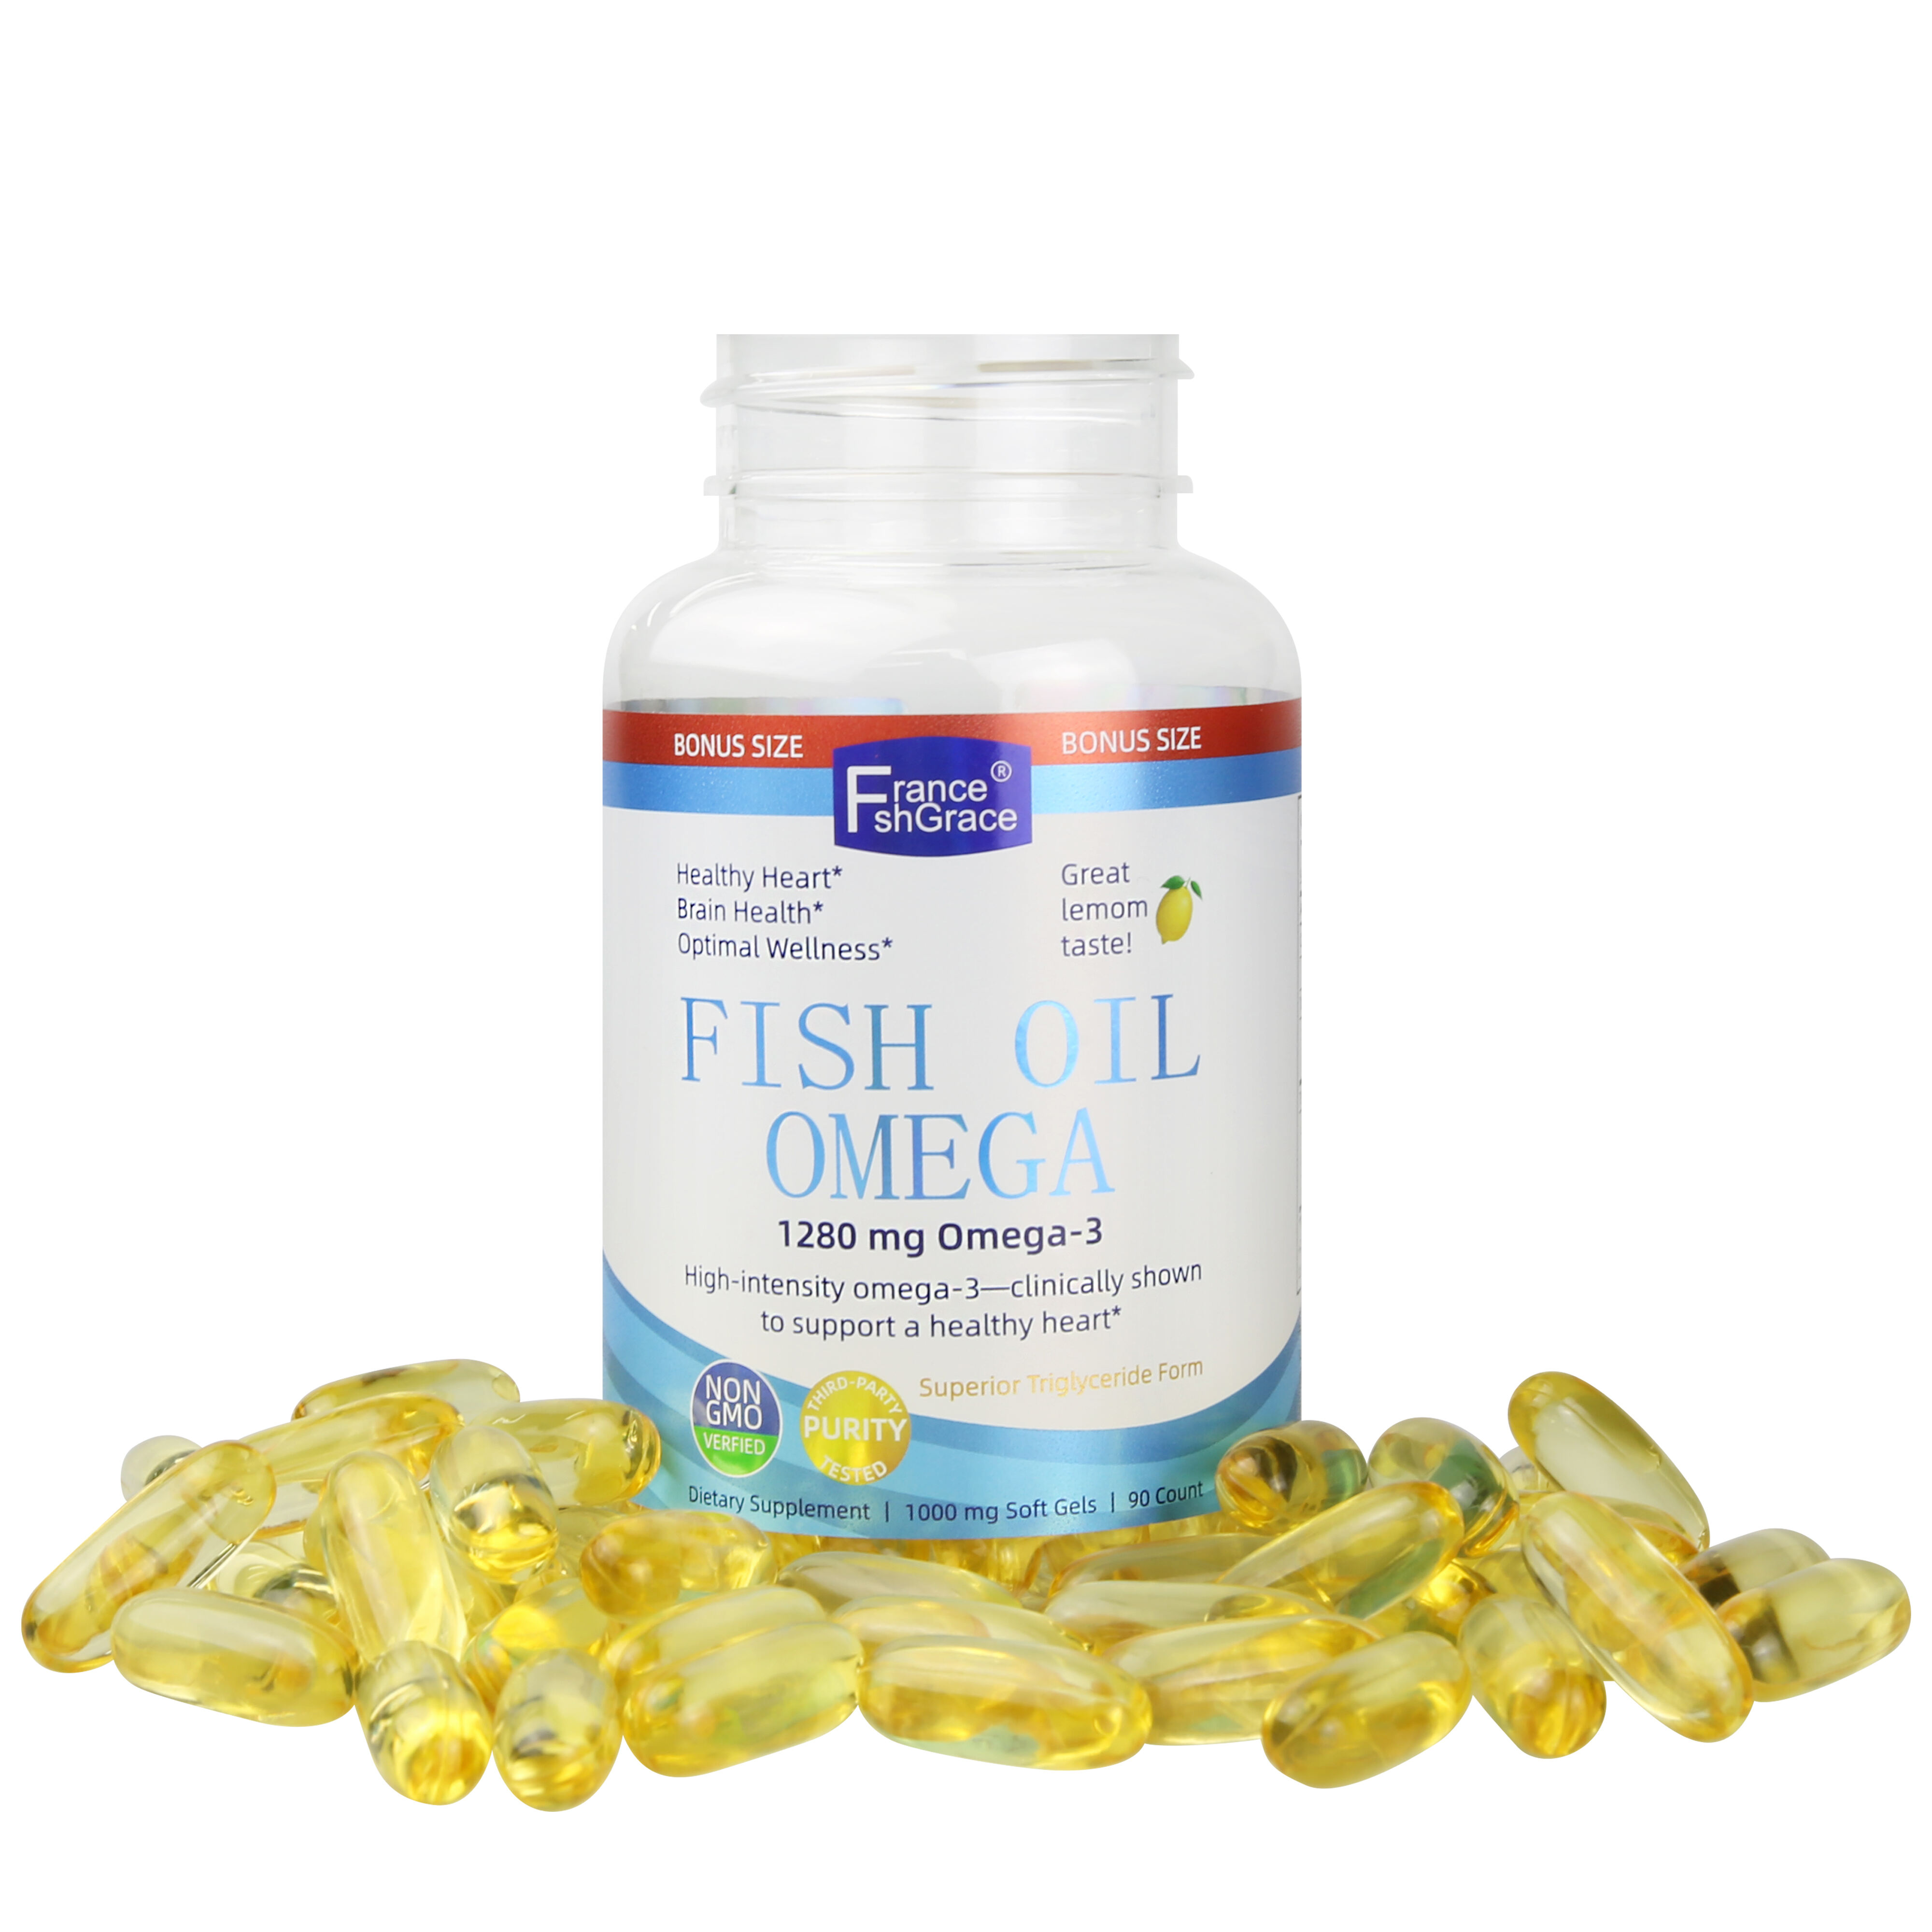 Omega 3 Fish Oil with Private Label manufacture